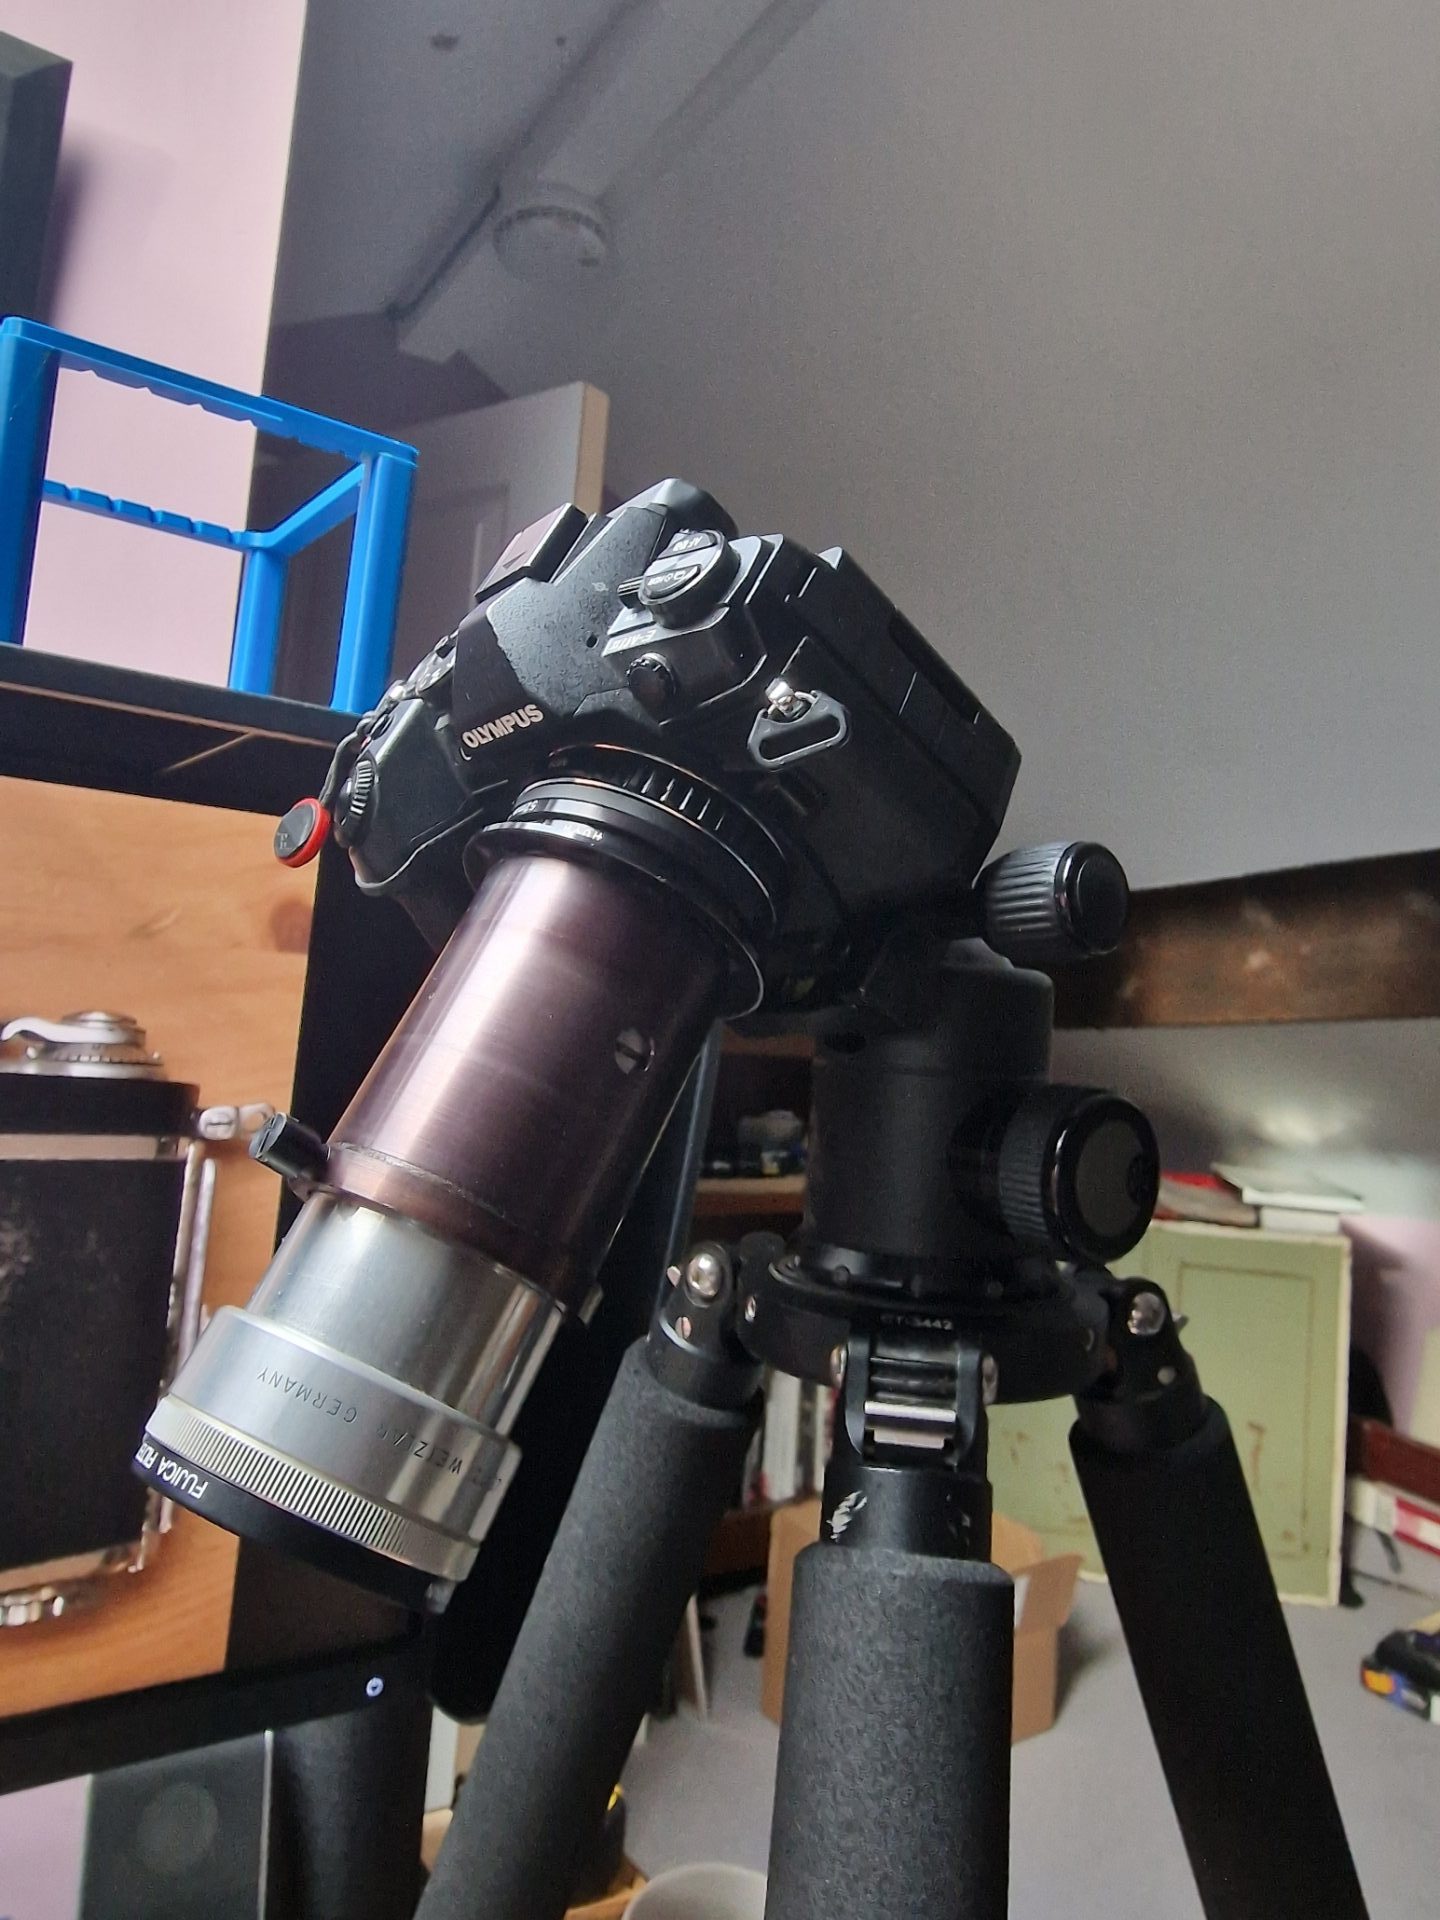 Camera, tripod and adapted lens